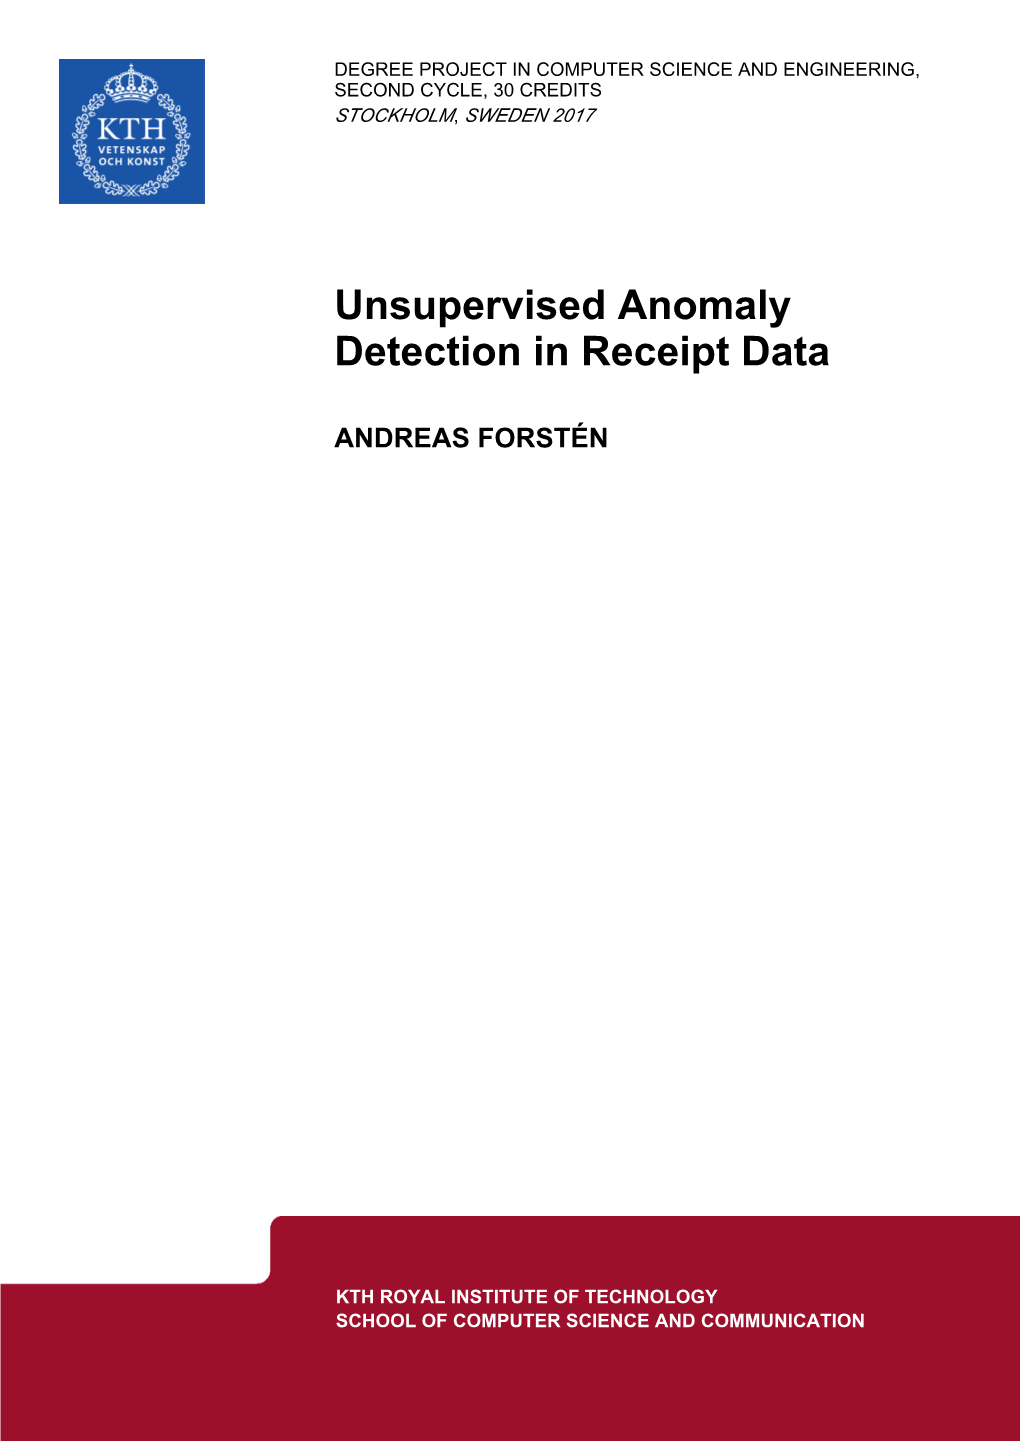 Unsupervised Anomaly Detection in Receipt Data